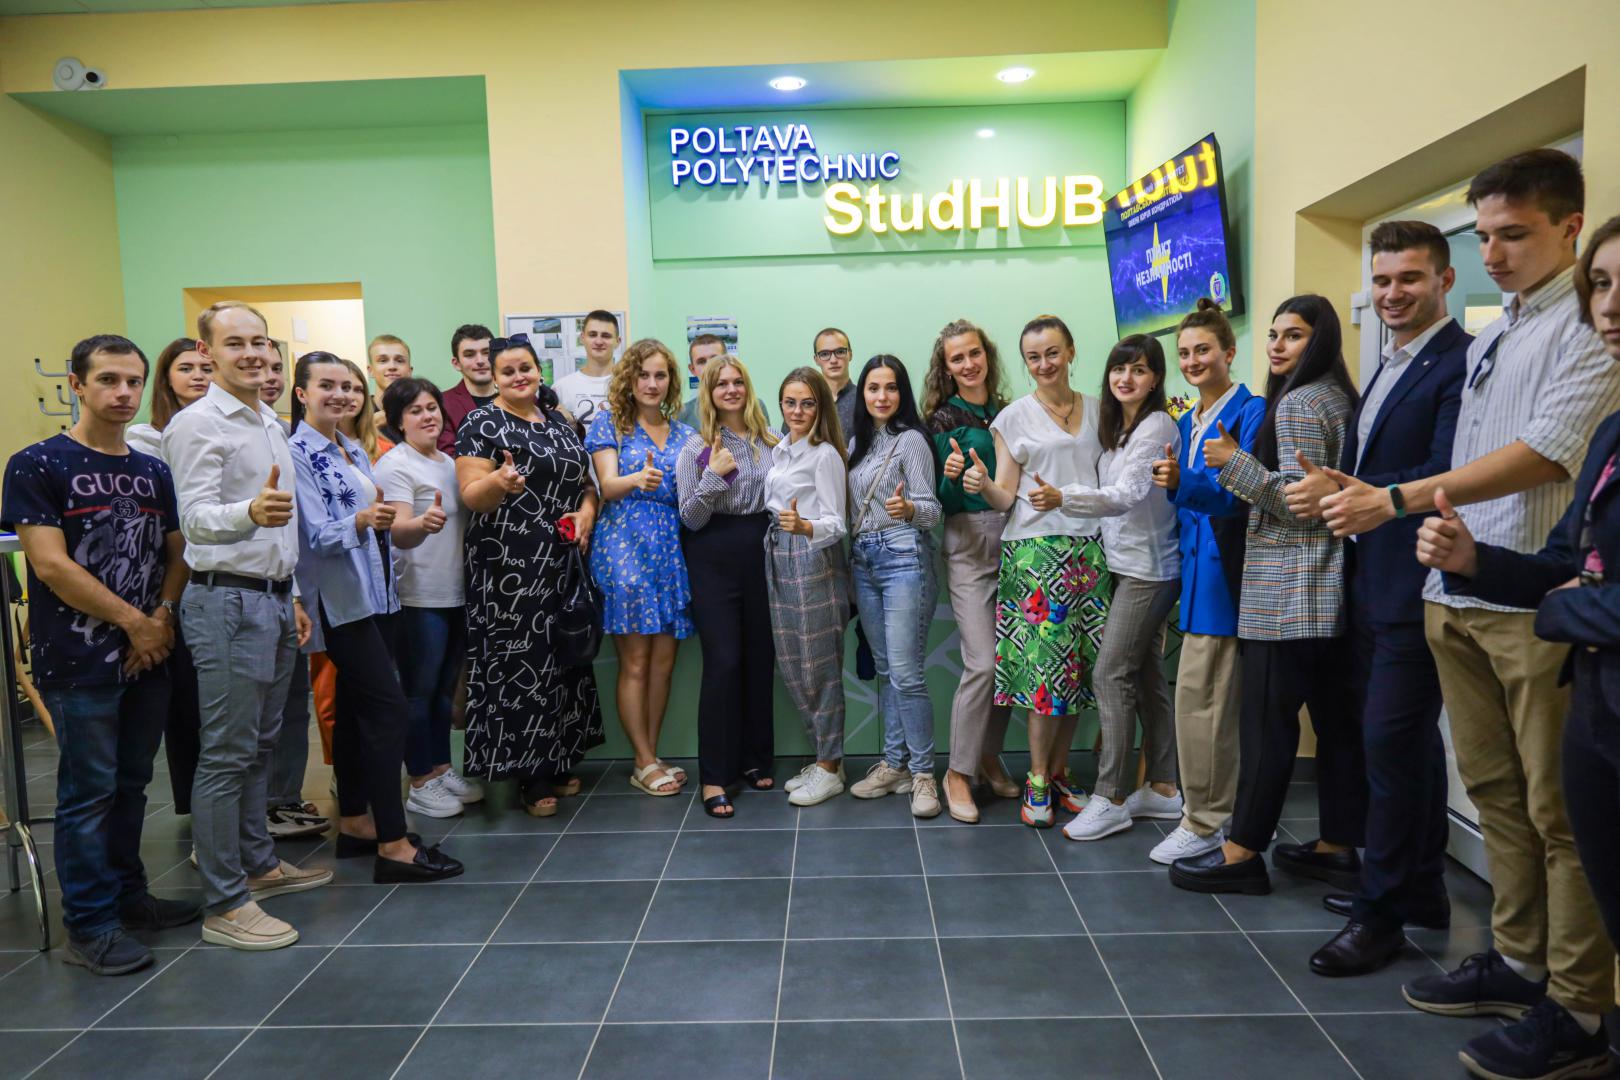 A meeting of youth leaders of the Poltava Region is held at the Polytechnic on the occasion of the International Youth Day